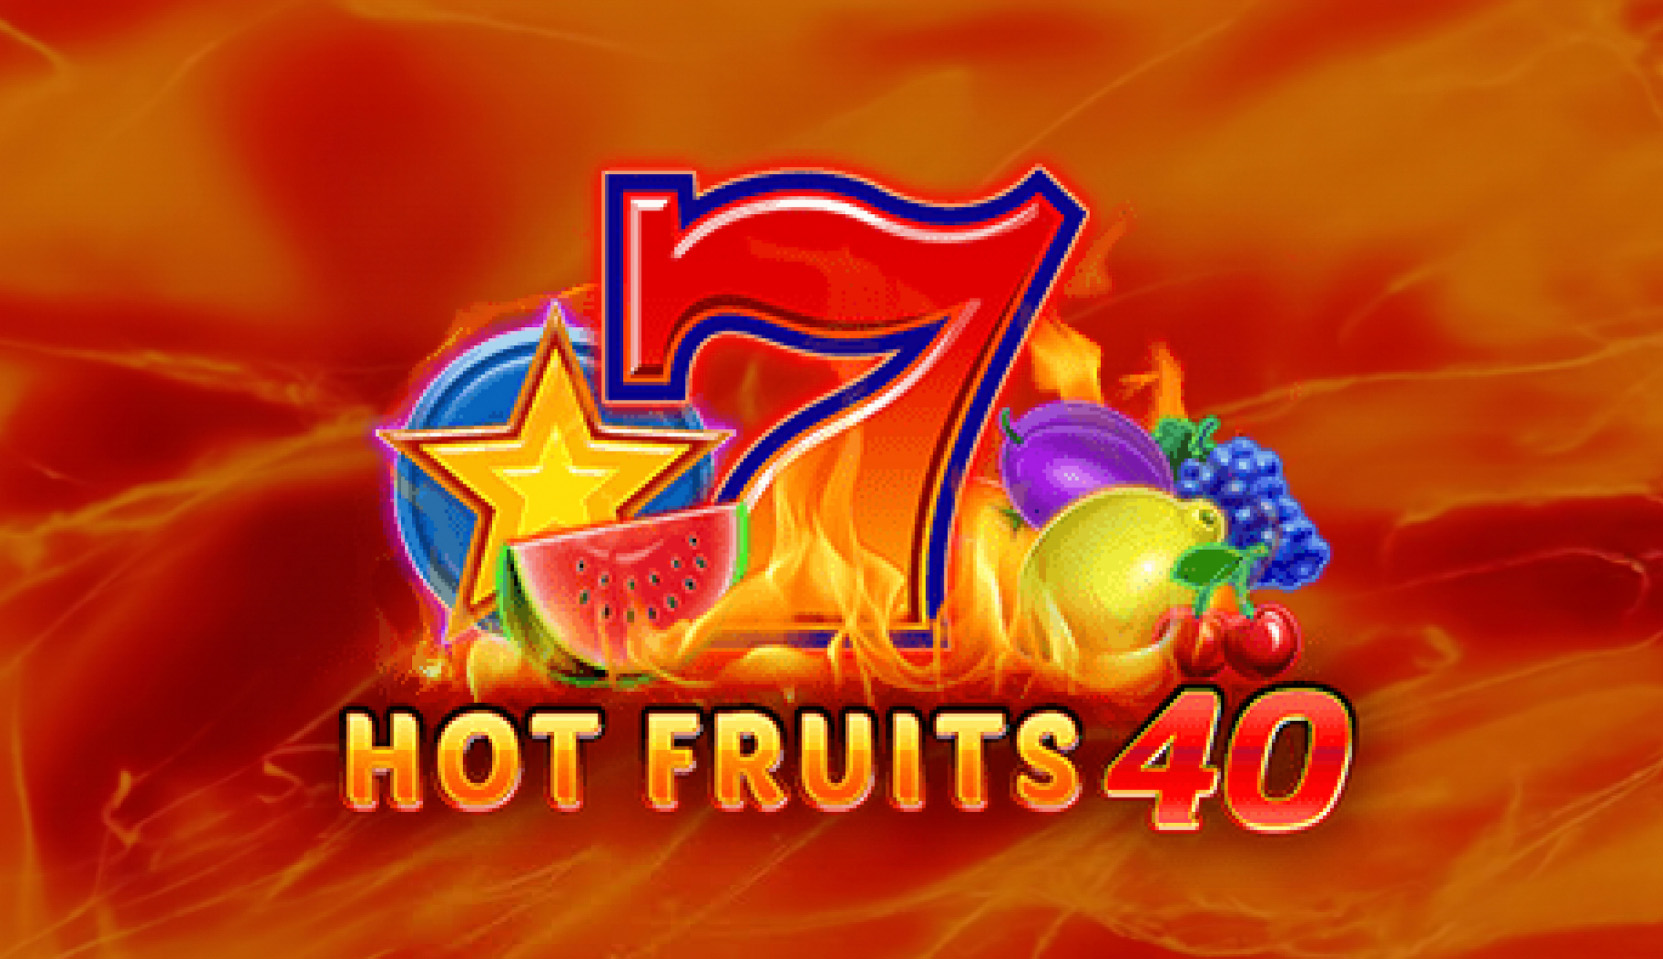 Hot Fruits 40' slot game featuring fiery backdrop with colorful fruit symbols and a bold number 7.